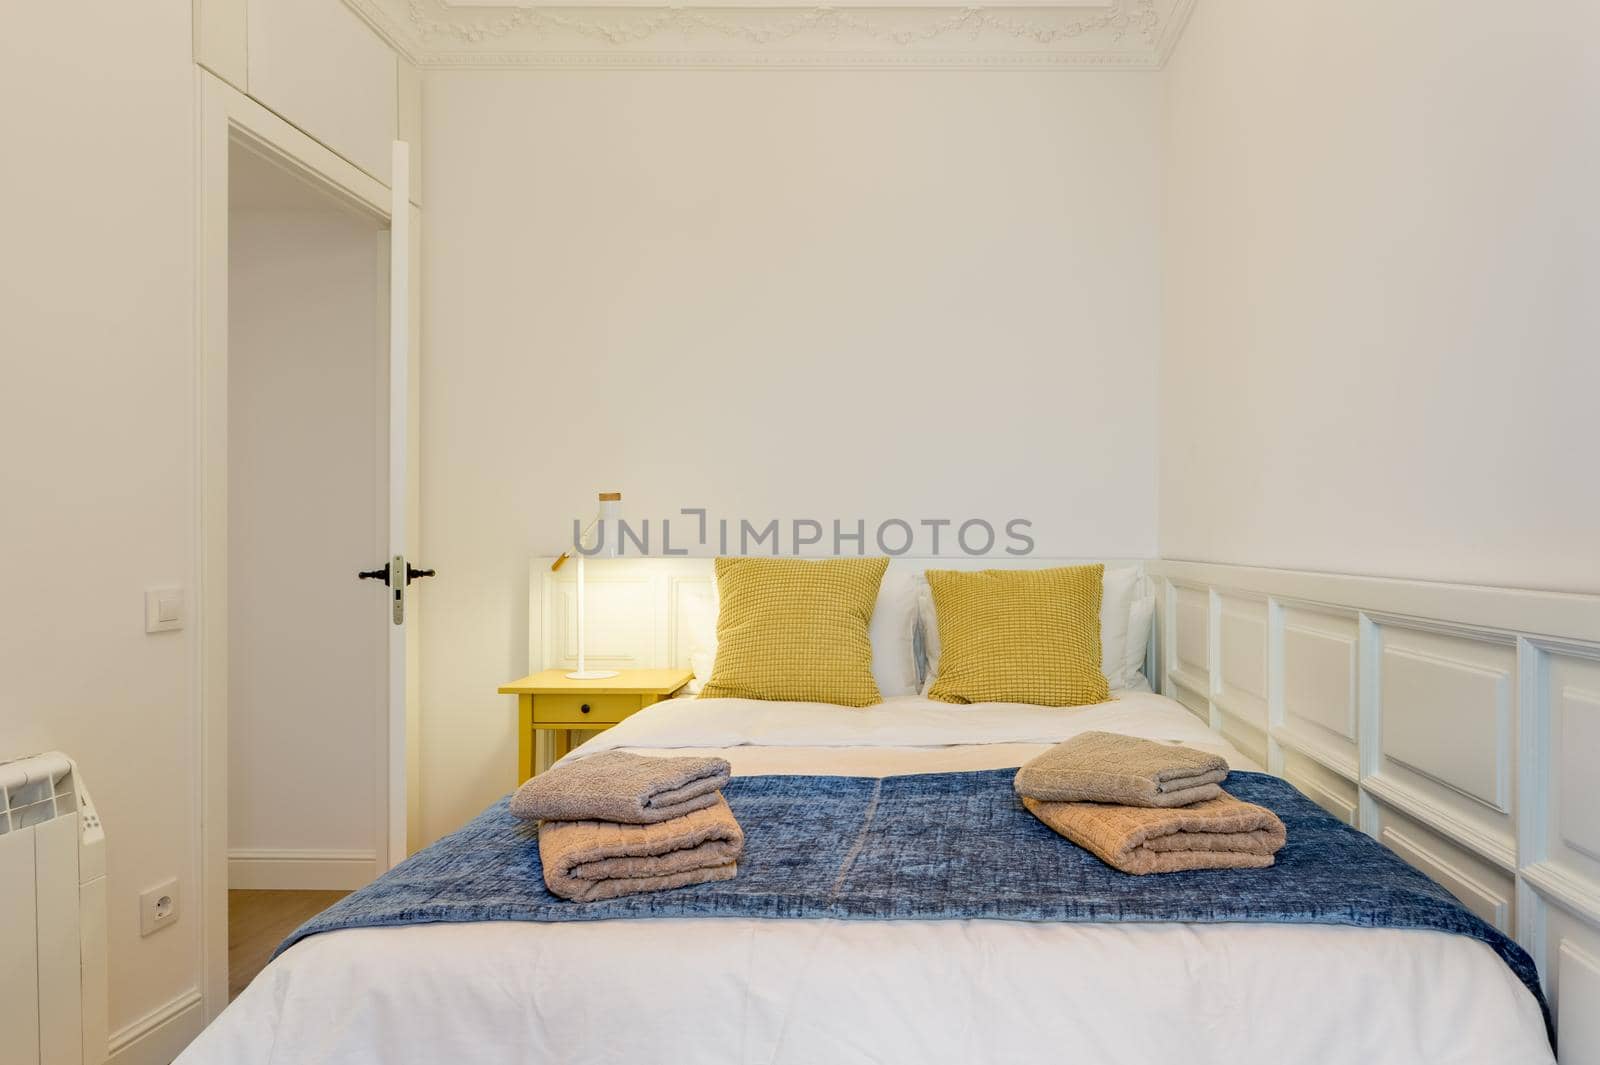 Interior of touristic bedroom. Yellow pillows on bed with towels. An apartment ready for booking by tourists by apavlin